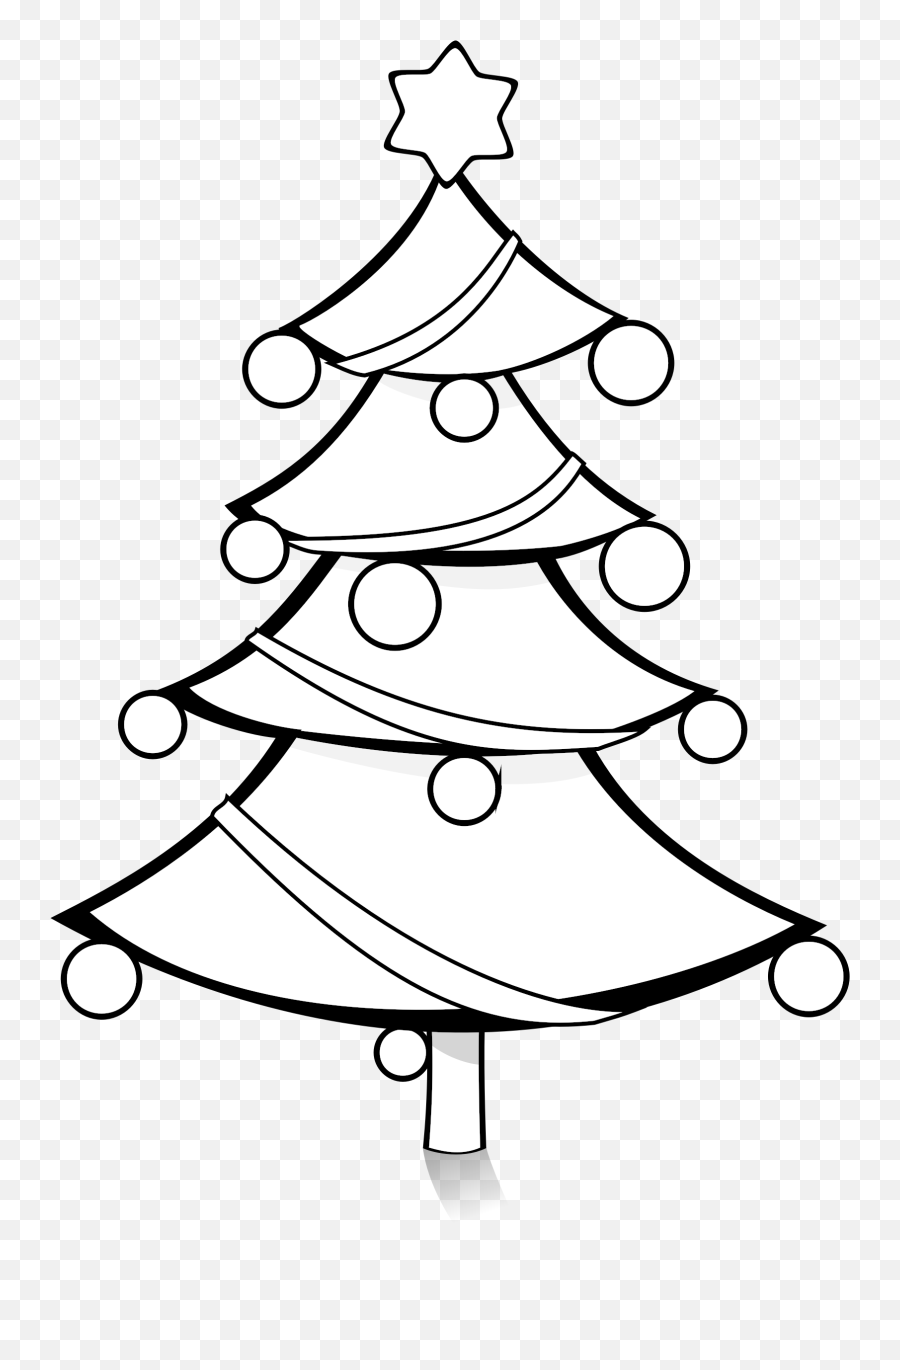 Christmas Tree Clip Art Black And White - Clipart Best Black And White Transparent Background Christmas Tree Clipart Emoji,Chrismas Tree Emoji